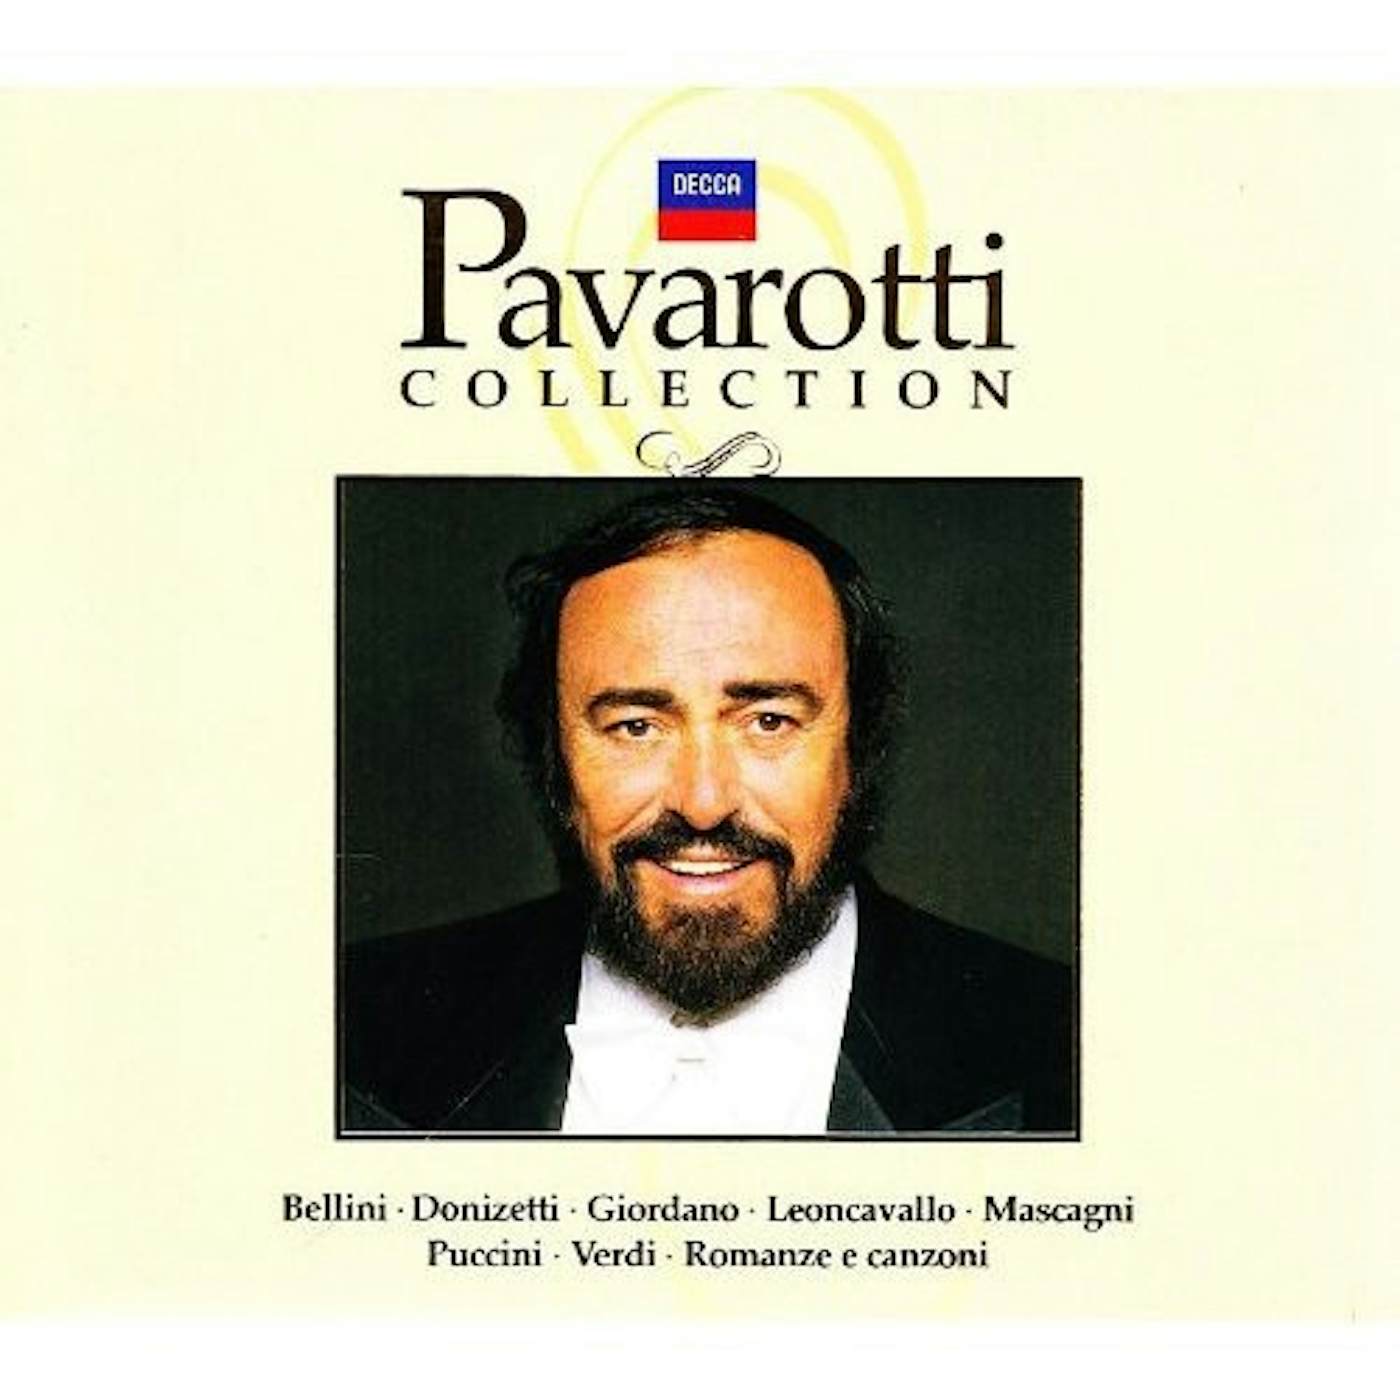 Luciano Pavarotti COLLECTION CD